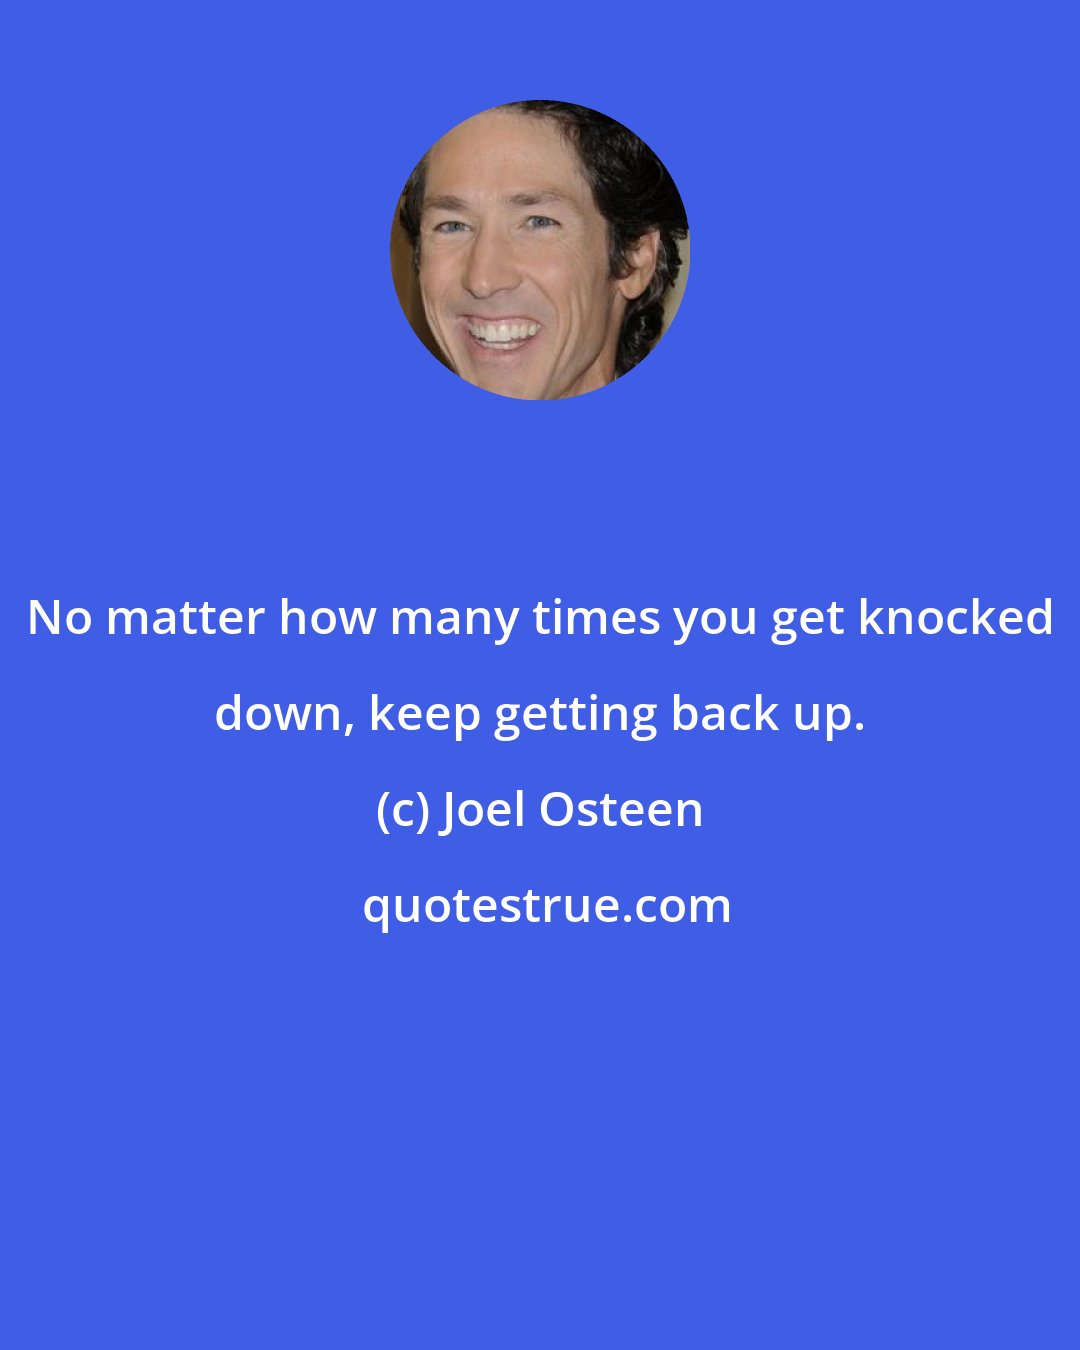 Joel Osteen: No matter how many times you get knocked down, keep getting back up.